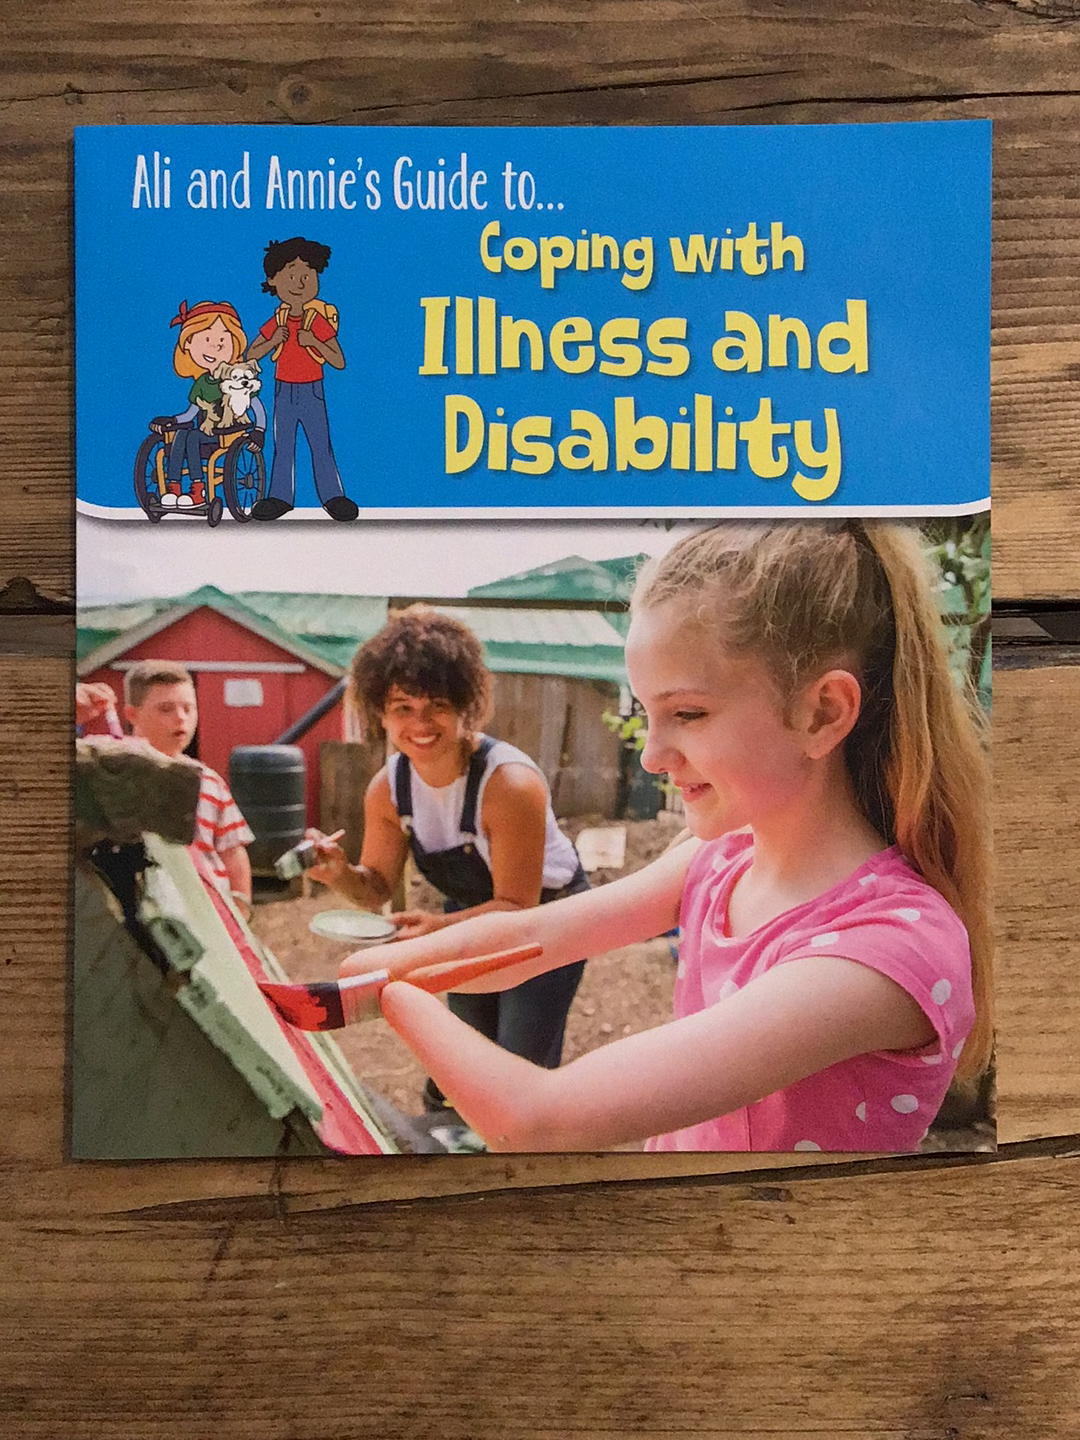 Coping with Illness and Disability